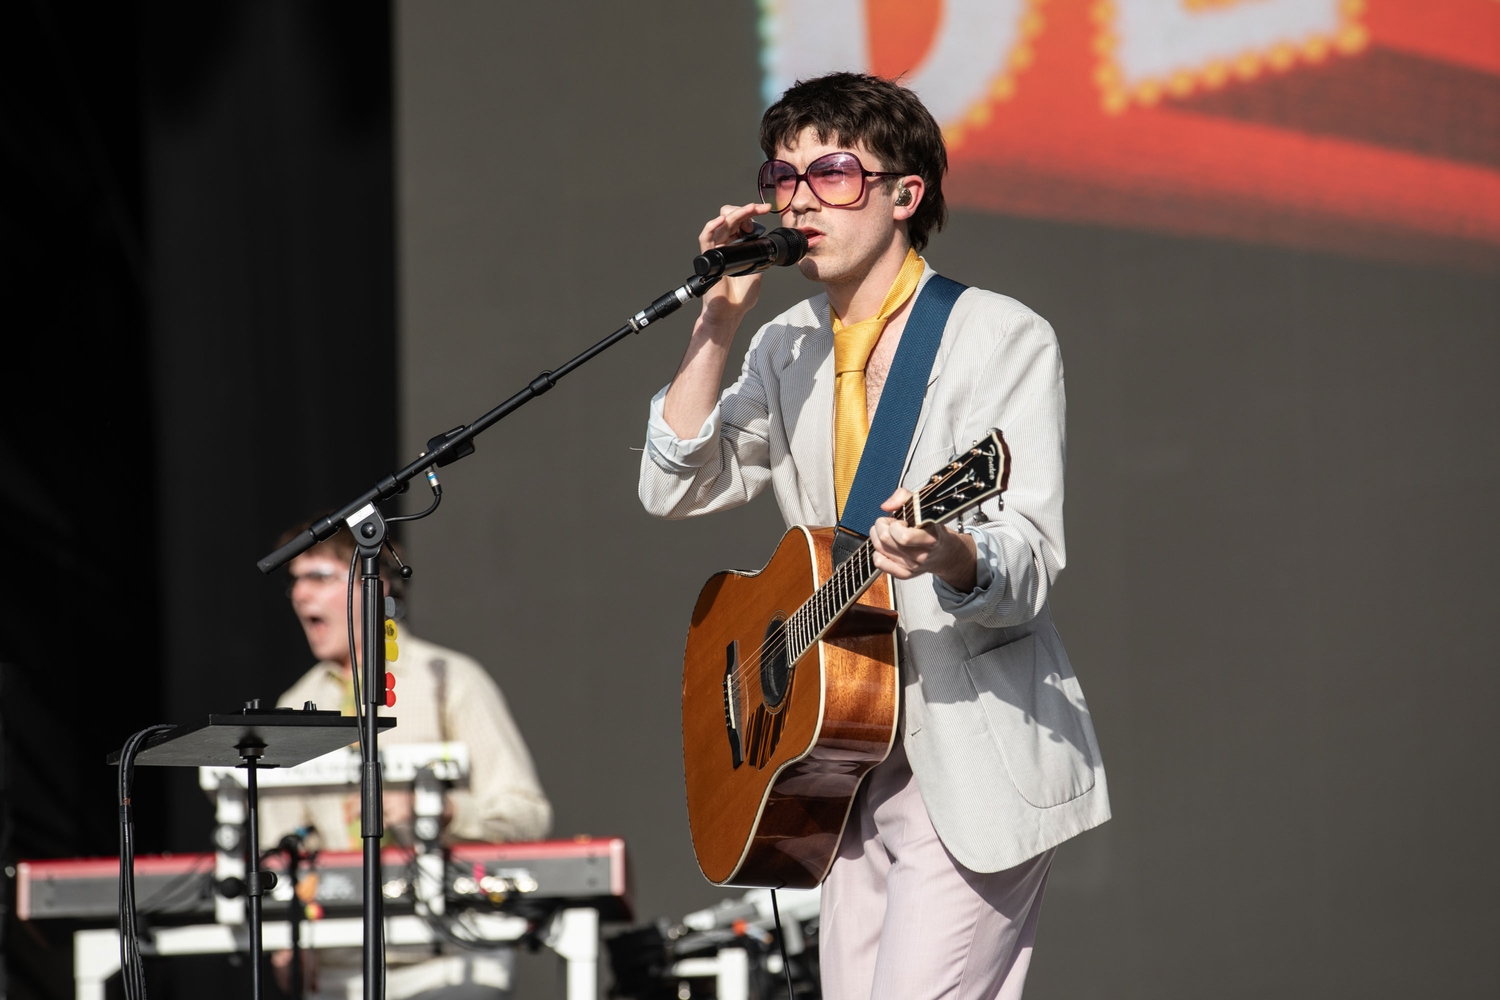 Live at Leeds In The Park announce Declan McKenna, The Cribs, Future Islands and more for 2024